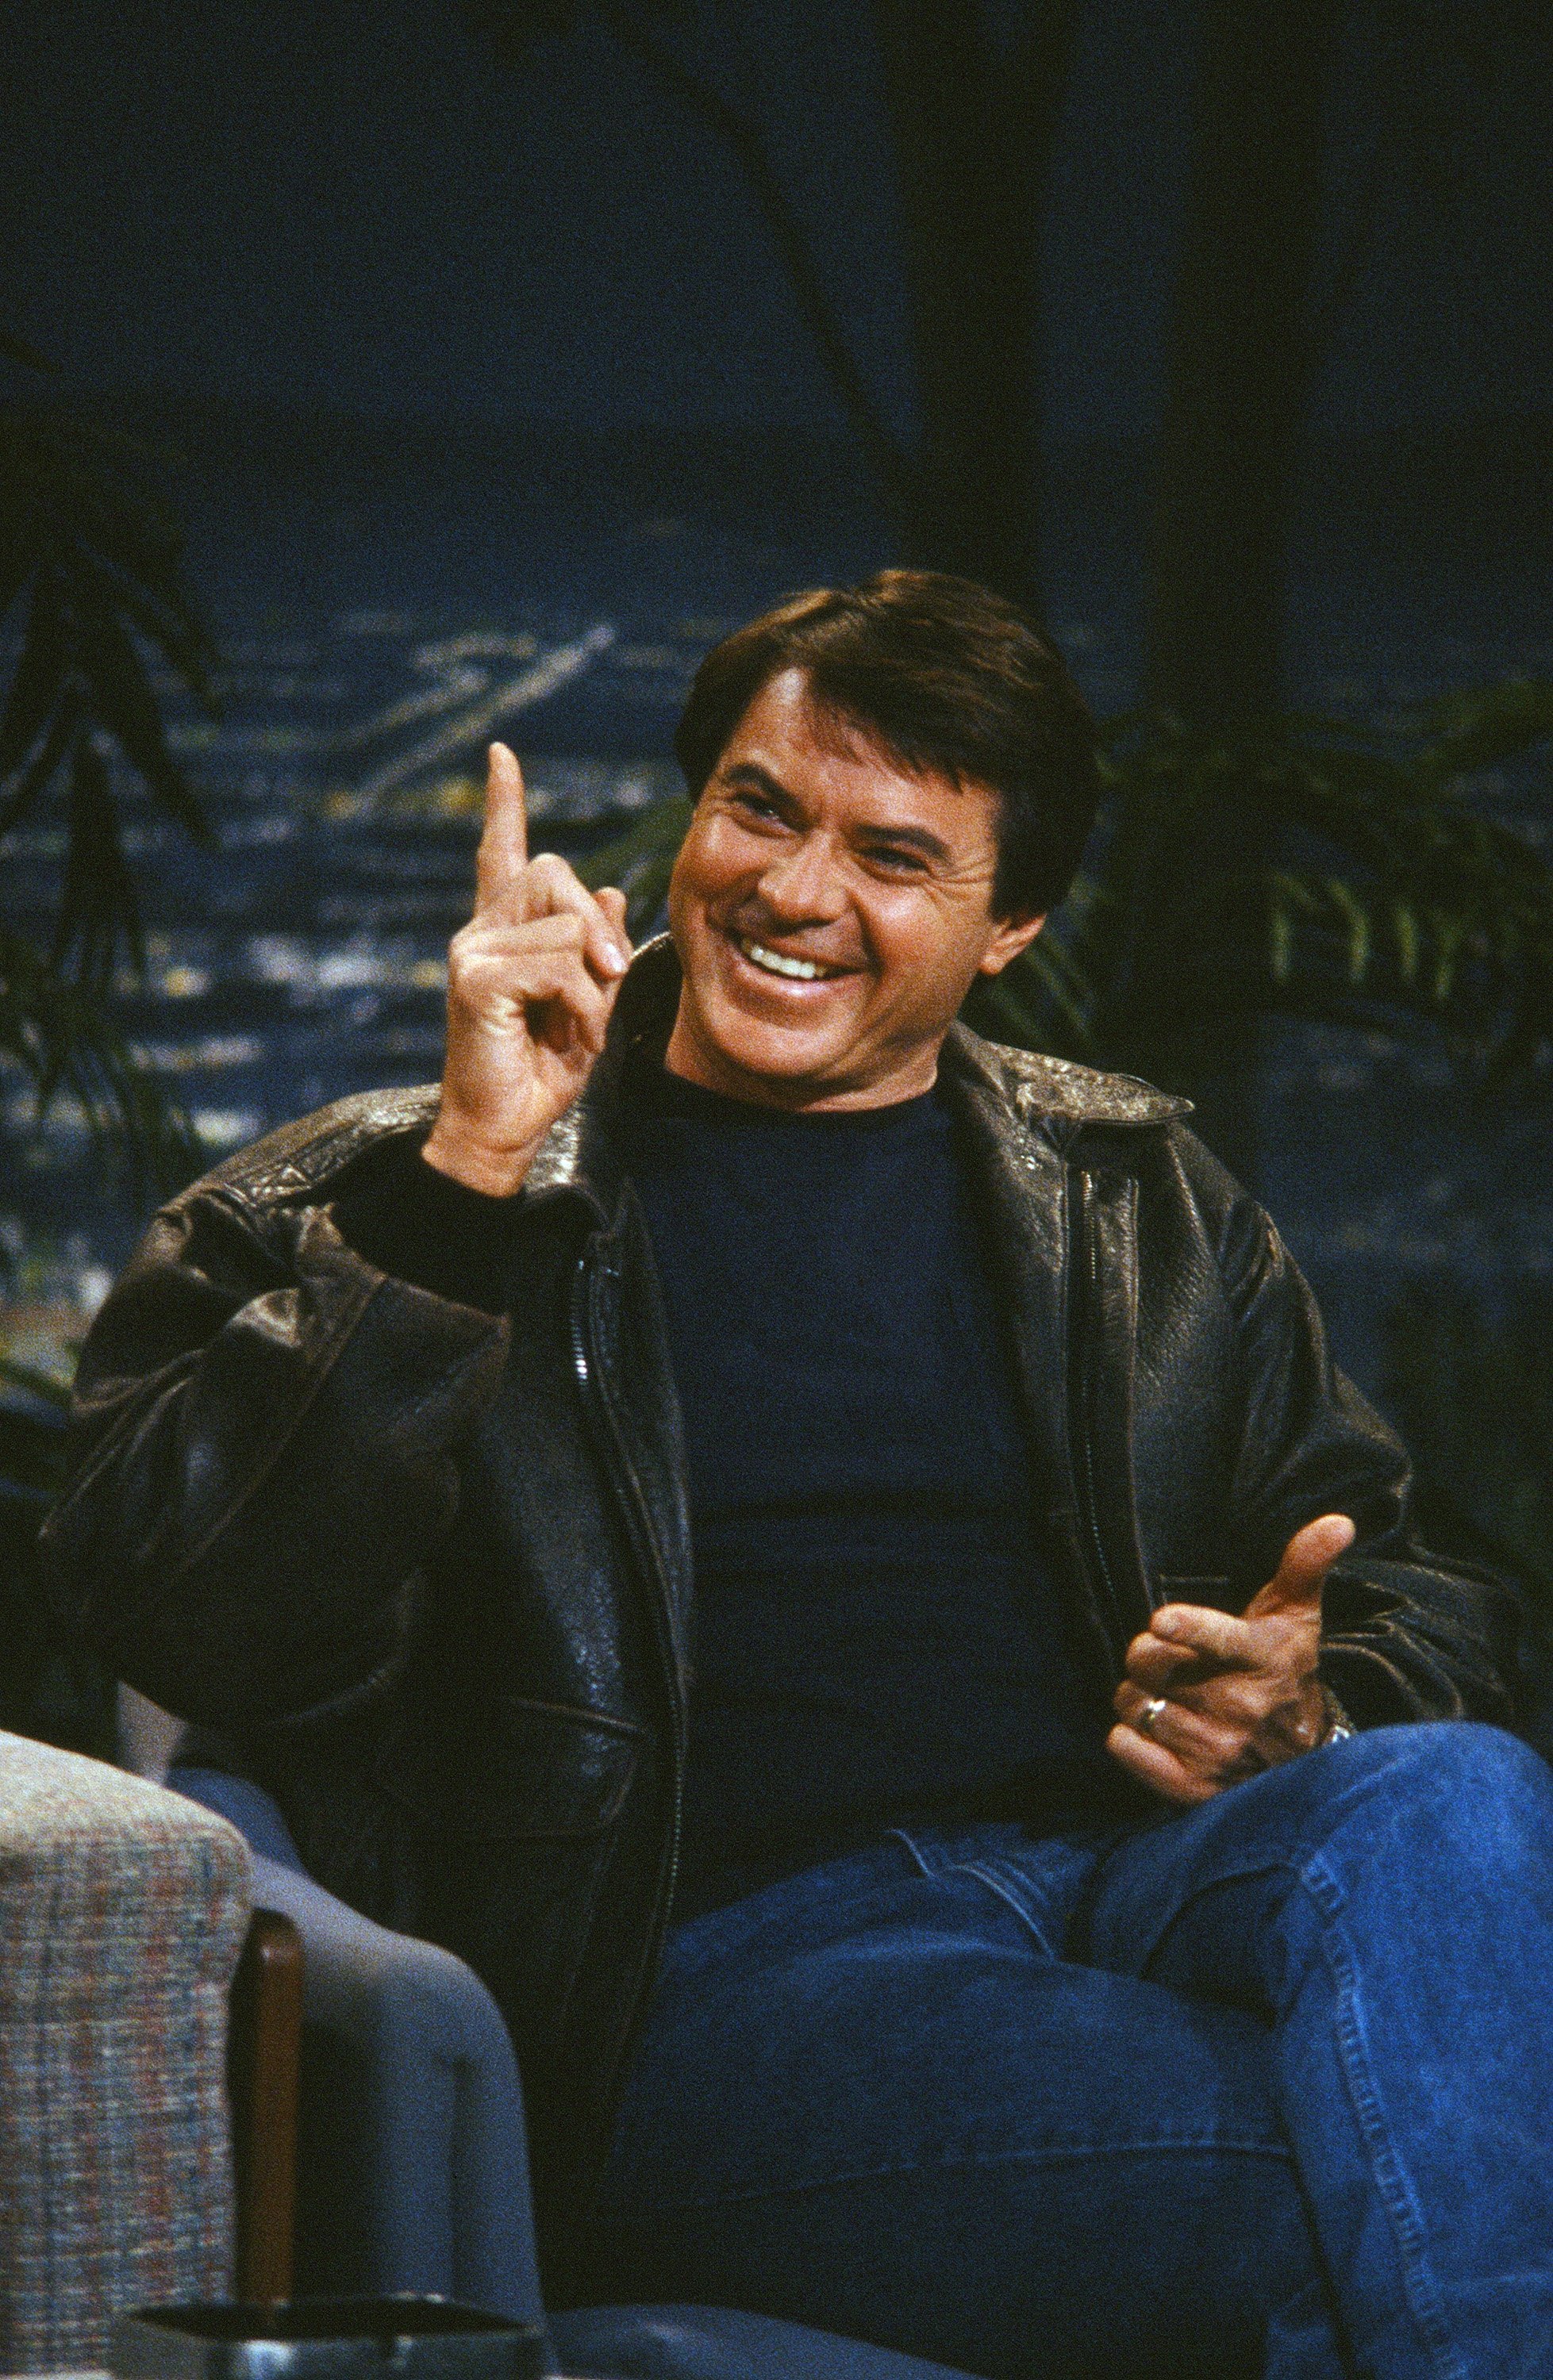 Robert Urich on "The Tonight Show Starring Johnny Carson", 1991 | Source: Getty Images